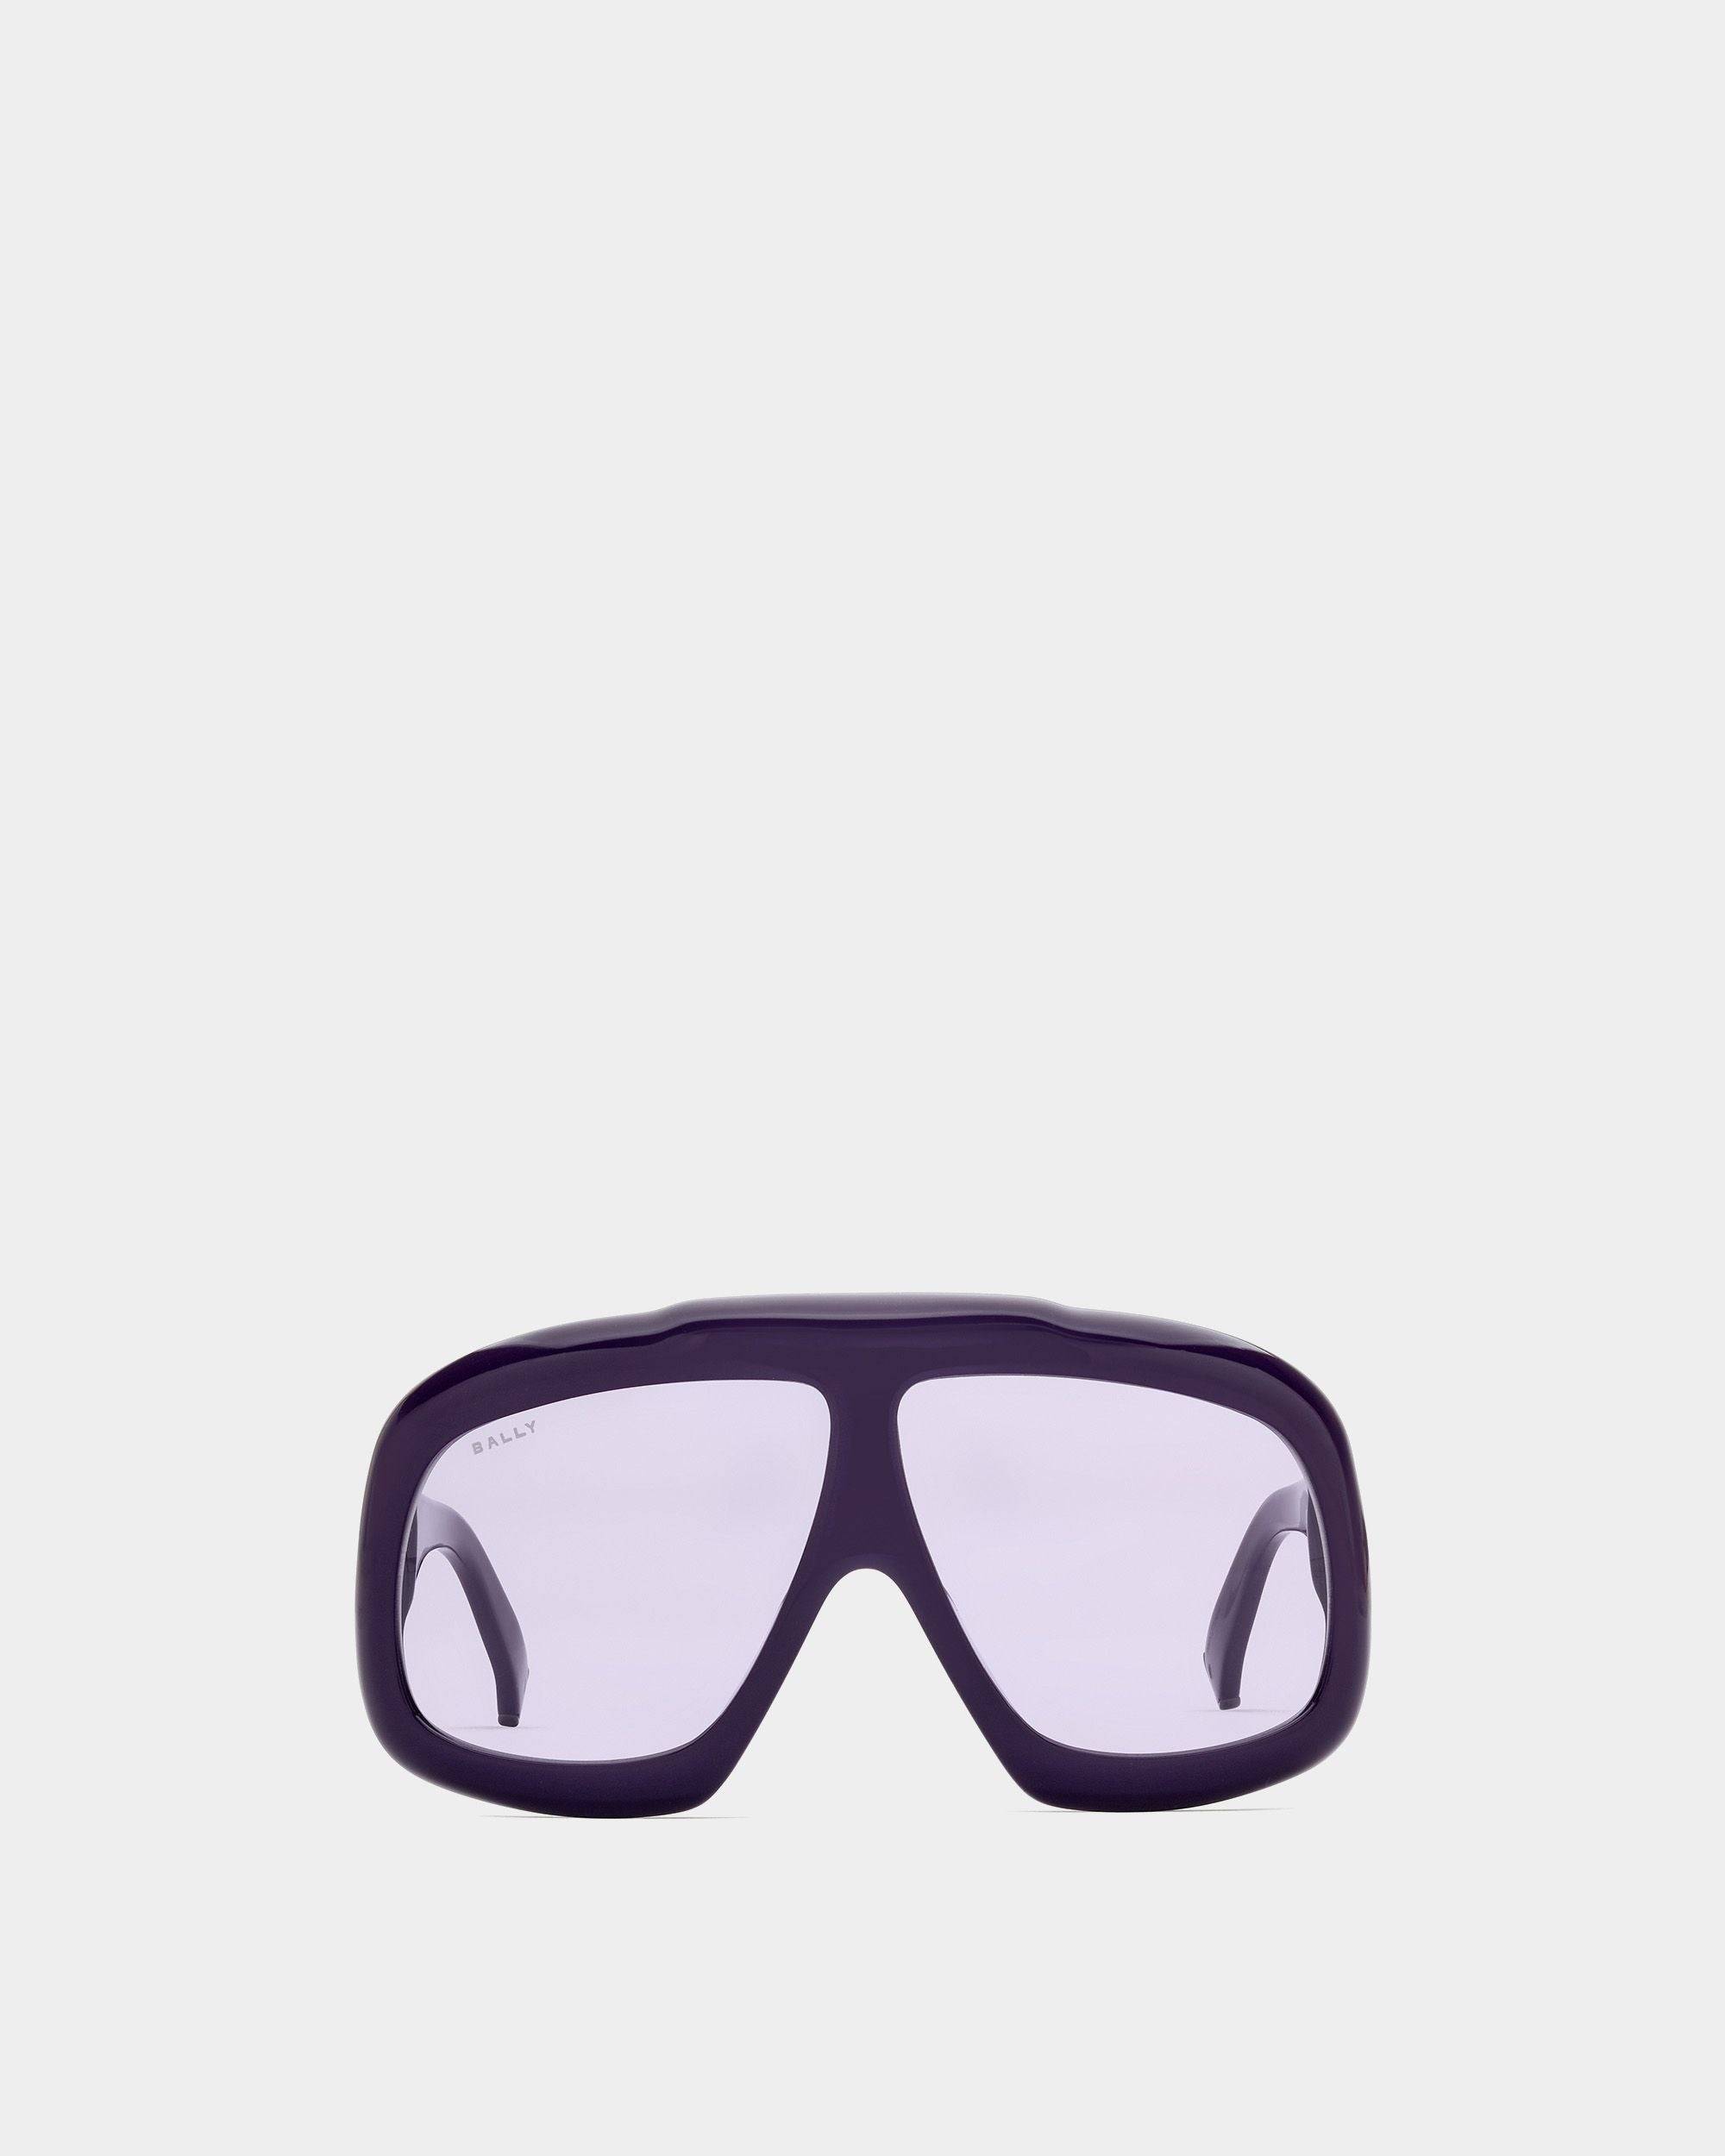 Eyger Acetate Sunglasses in Purple and Lilac | Bally | Still Life Front